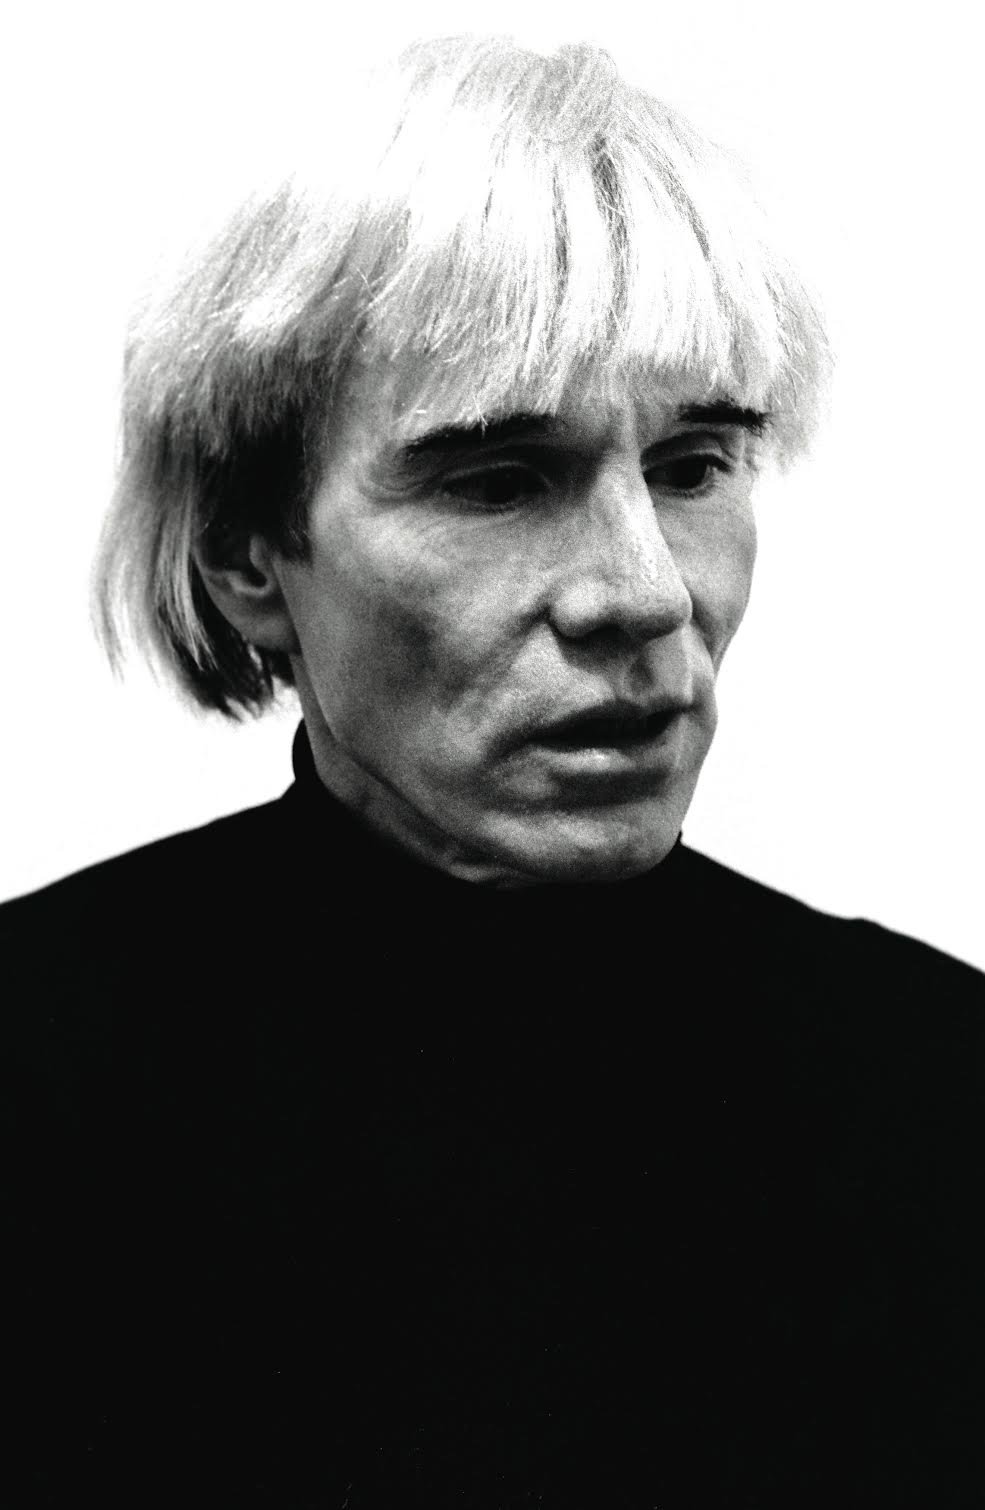  Andy Warhol, Los Angeles, CA, 1985. Photograph by Edward Colver. 